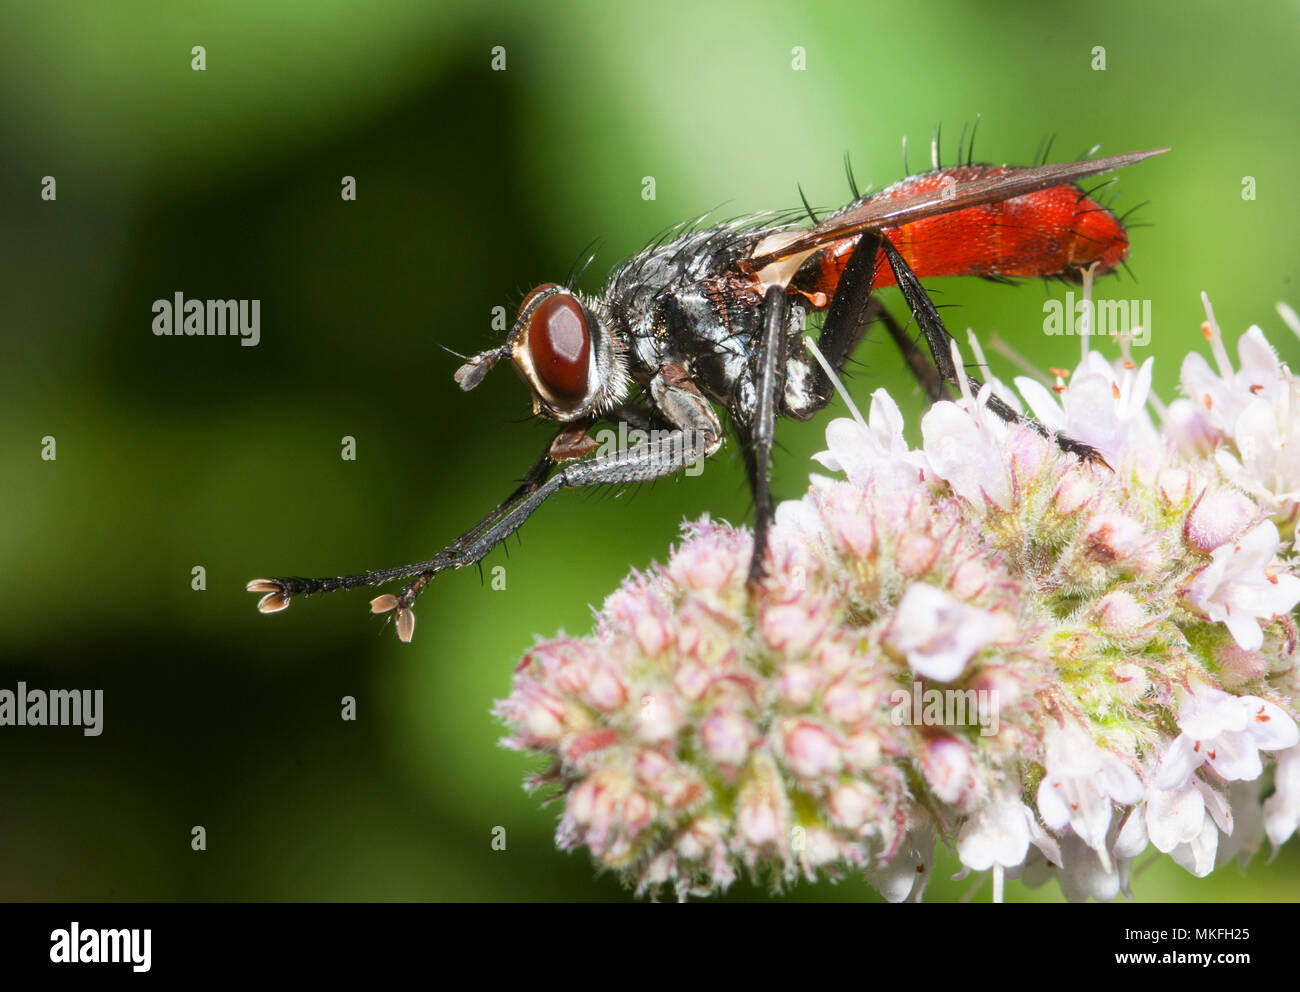 Tachinid fly (Cylindromyia bicolor) on a flower, Regional Natural Park of Northern Vosges, France Stock Photo